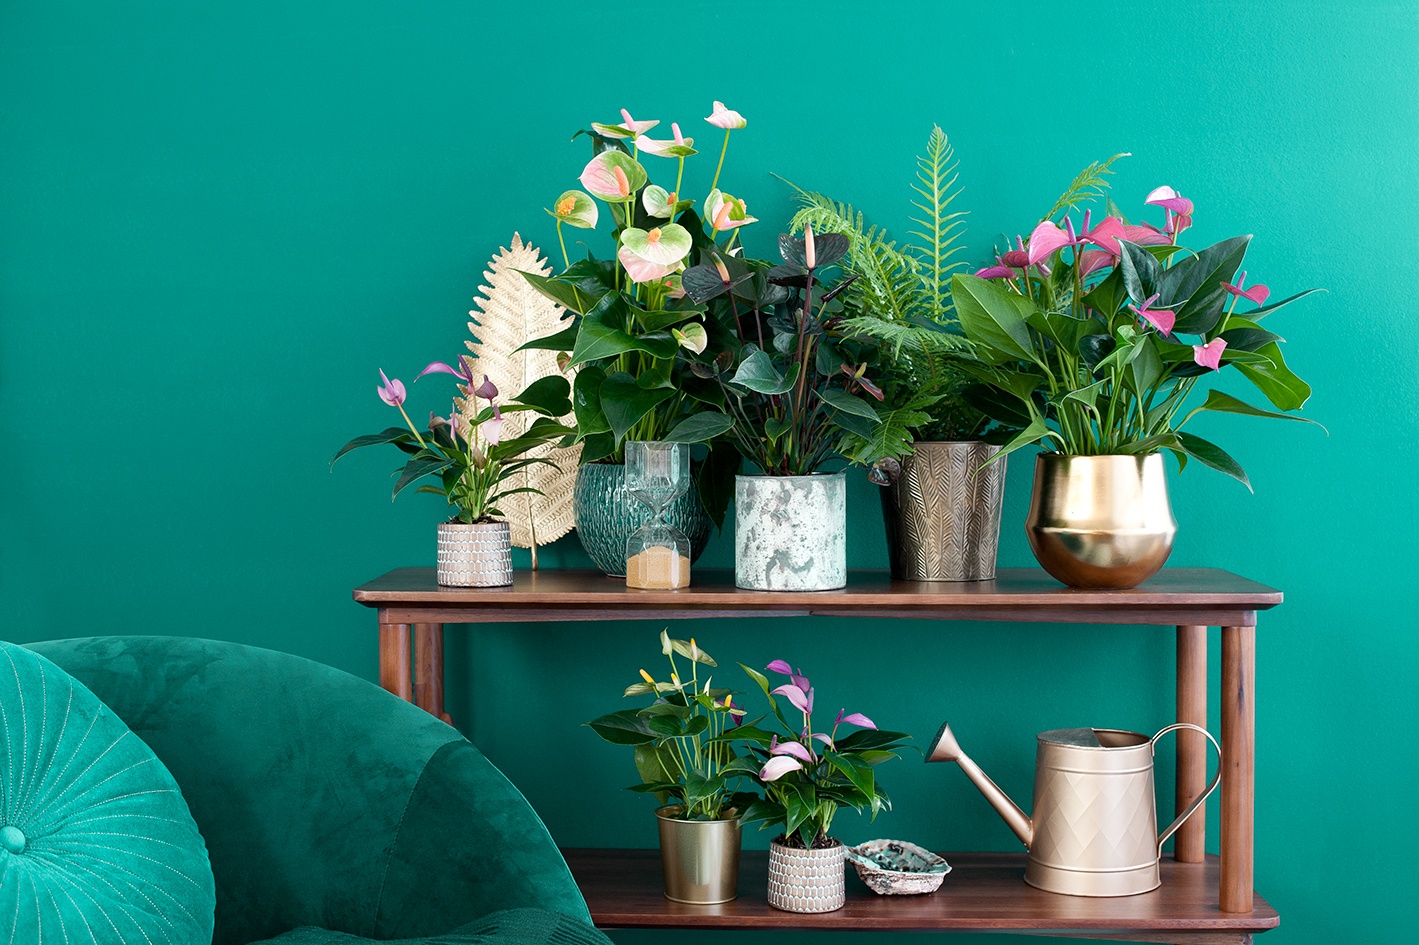 The interior design trends for 2020: warm, green & natural